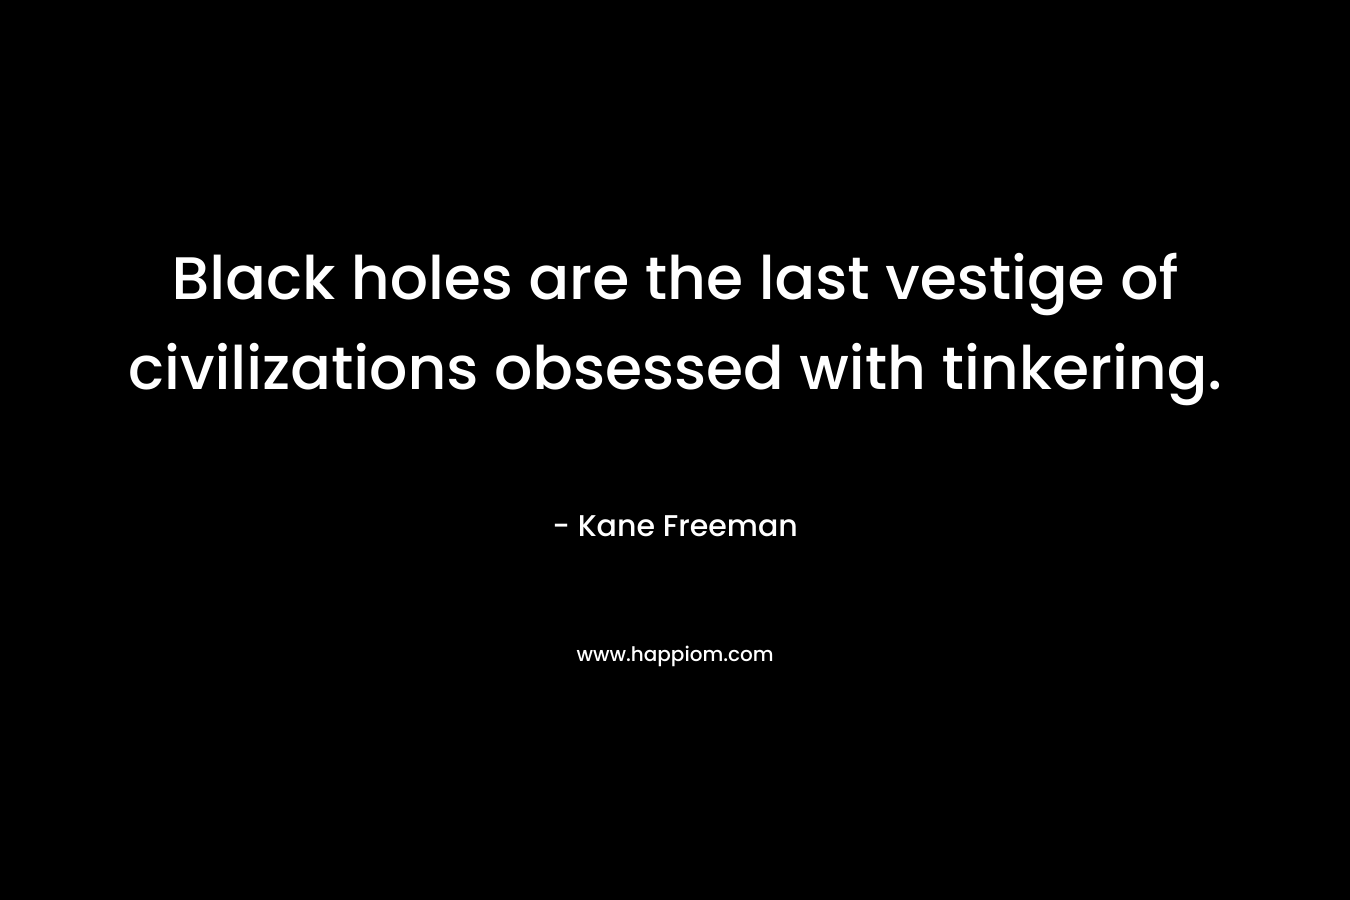 Black holes are the last vestige of civilizations obsessed with tinkering. – Kane Freeman